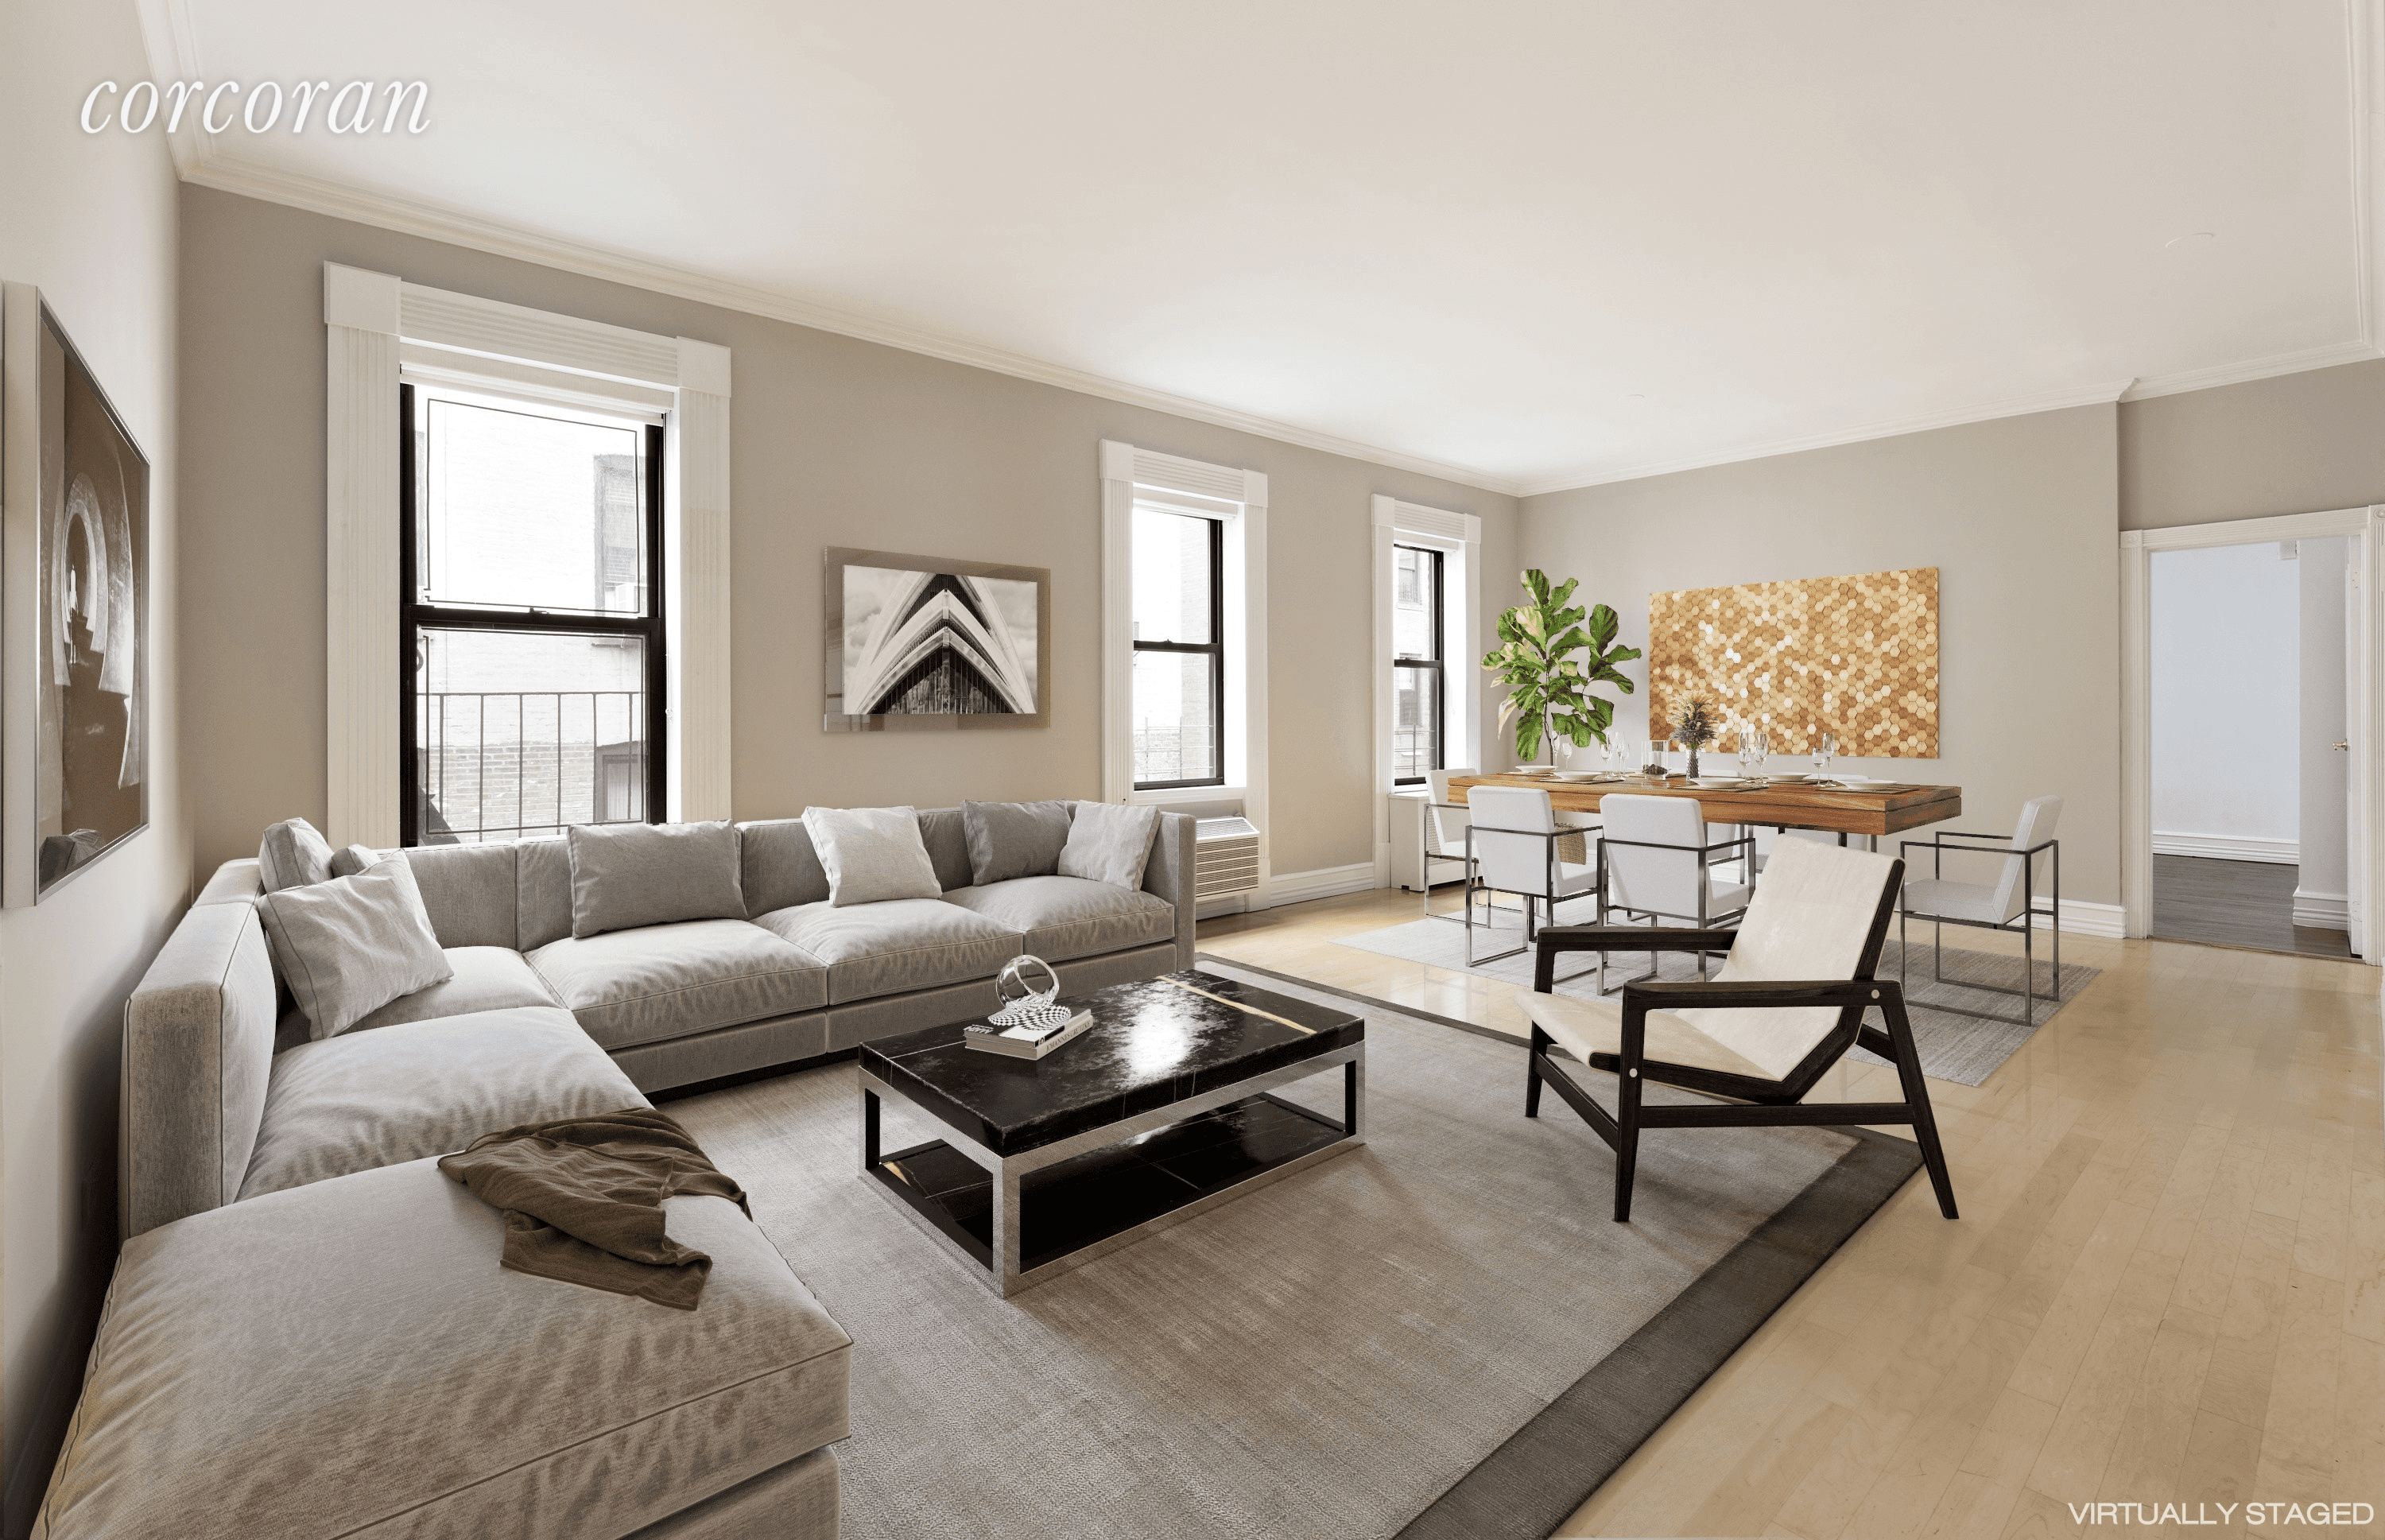 Residence 5DC at 56 E 87th Street is located in a lovely boutique Beaux Arts co op nestled between Park and Madison Avenues.